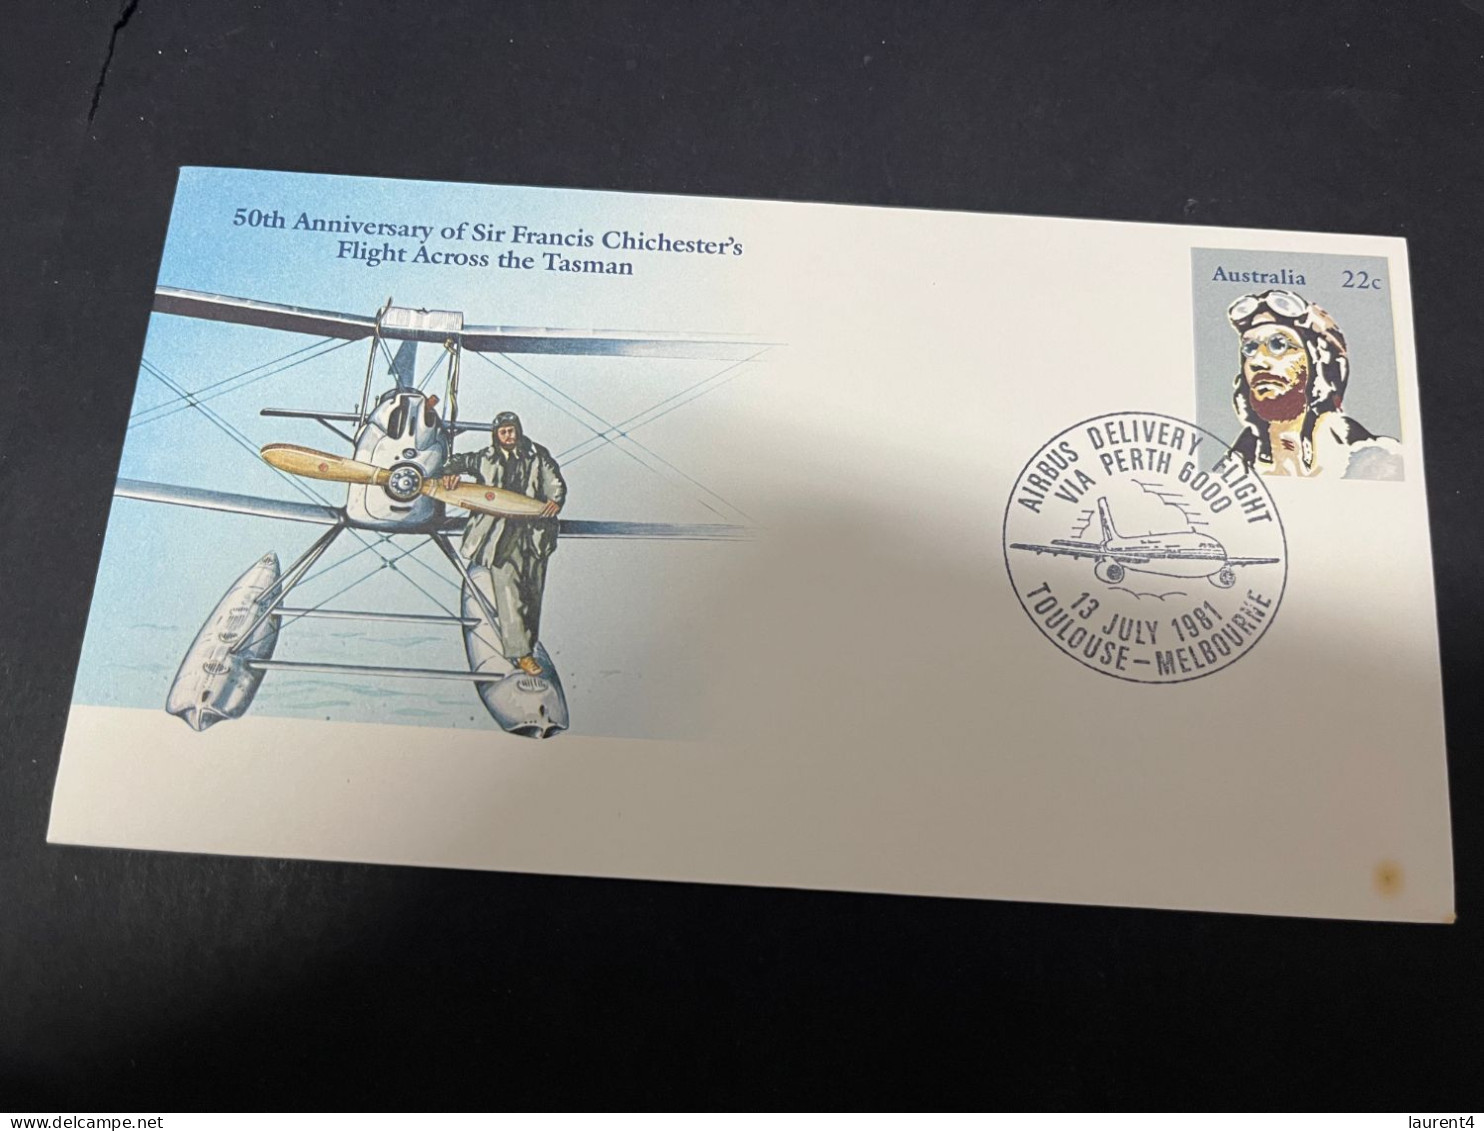 30-4-2023 (3 Z 29) Australia FDC (1 Cover) 1981 - 50th Anniversary Francis Chichesters (Airbus Delivery Via Perh) - Premiers Jours (FDC)